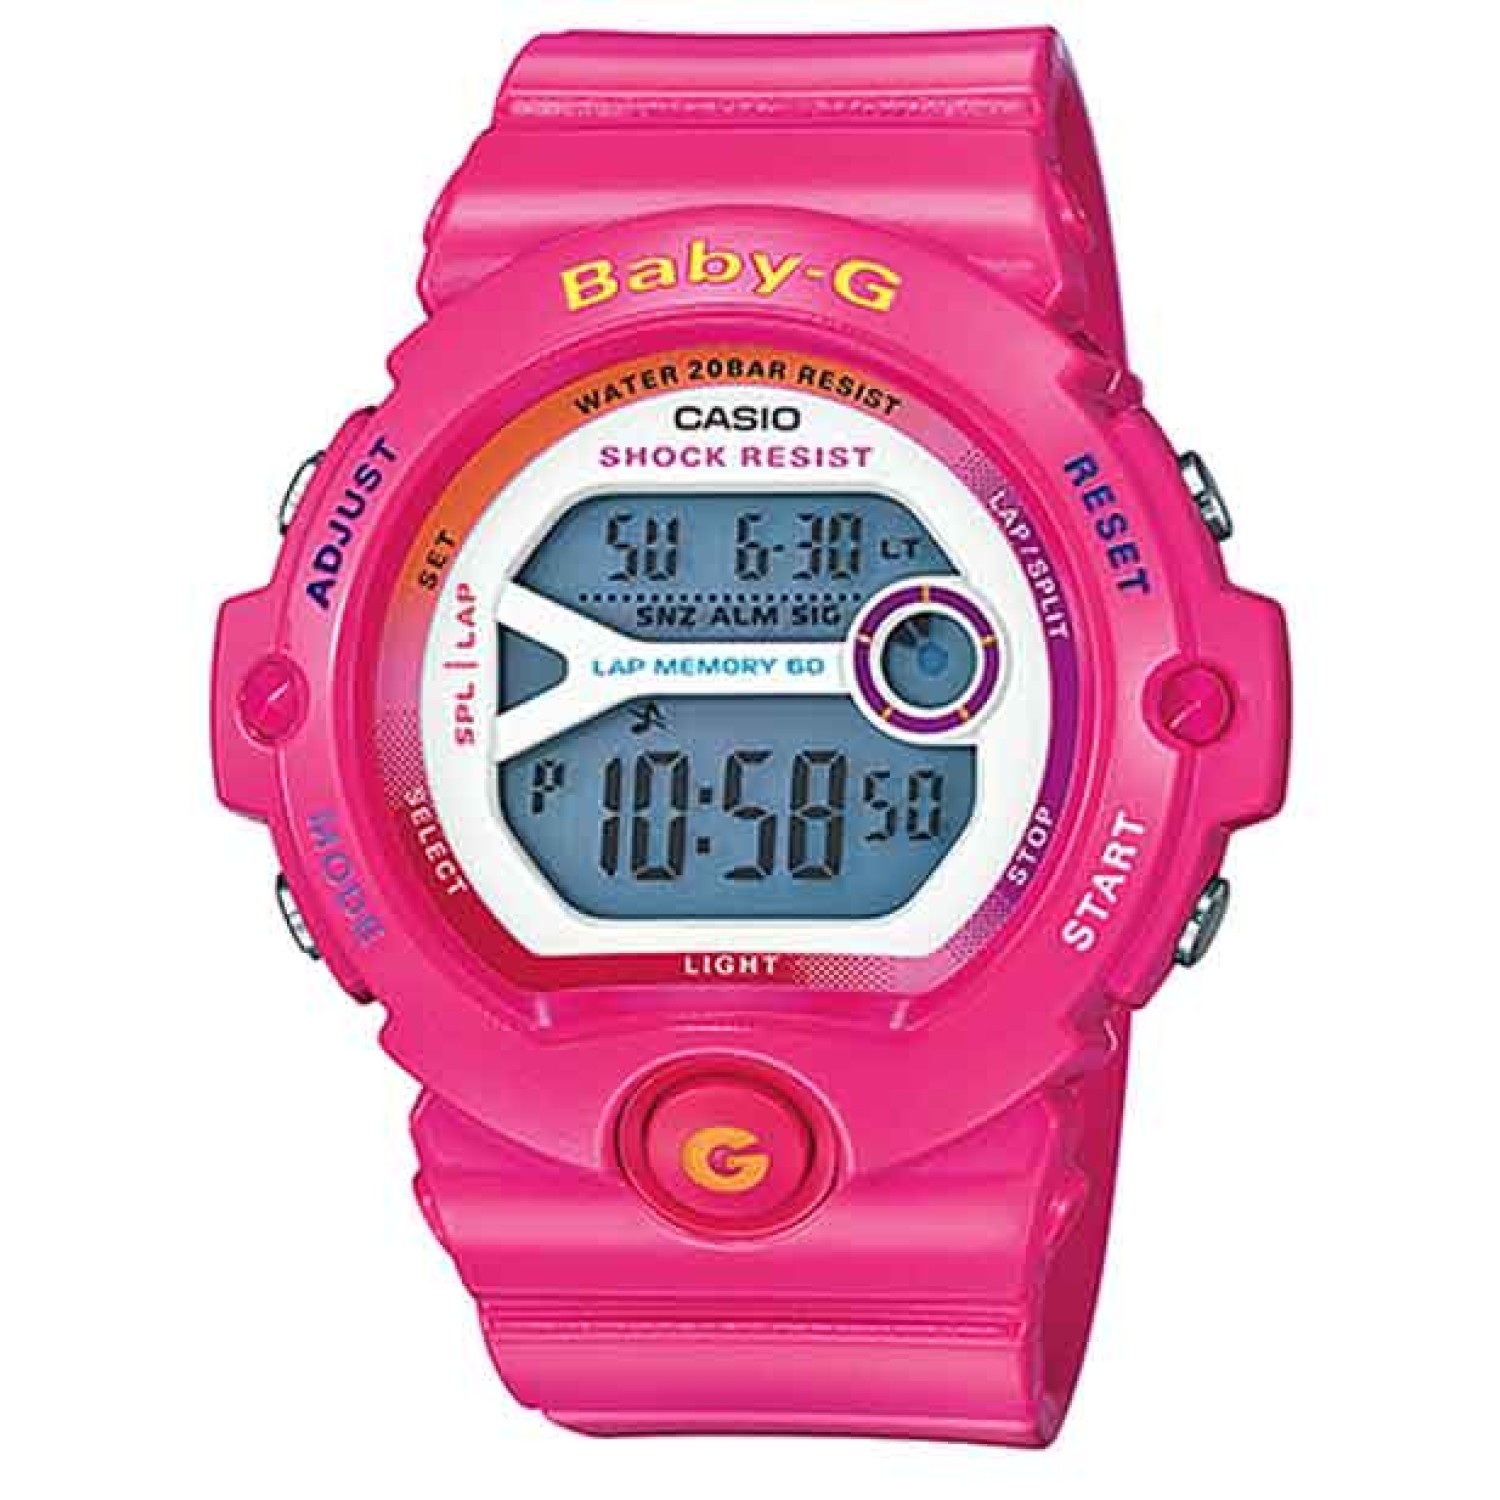 BG6903-4B Casio BabY-G Dual Time Watch. These Baby-G models have been specially designed with runners in mind. The stopwatch is equipped with memory for up to 60 laps, and a large case design enables easy reading of elapsed time and lap times while runnin